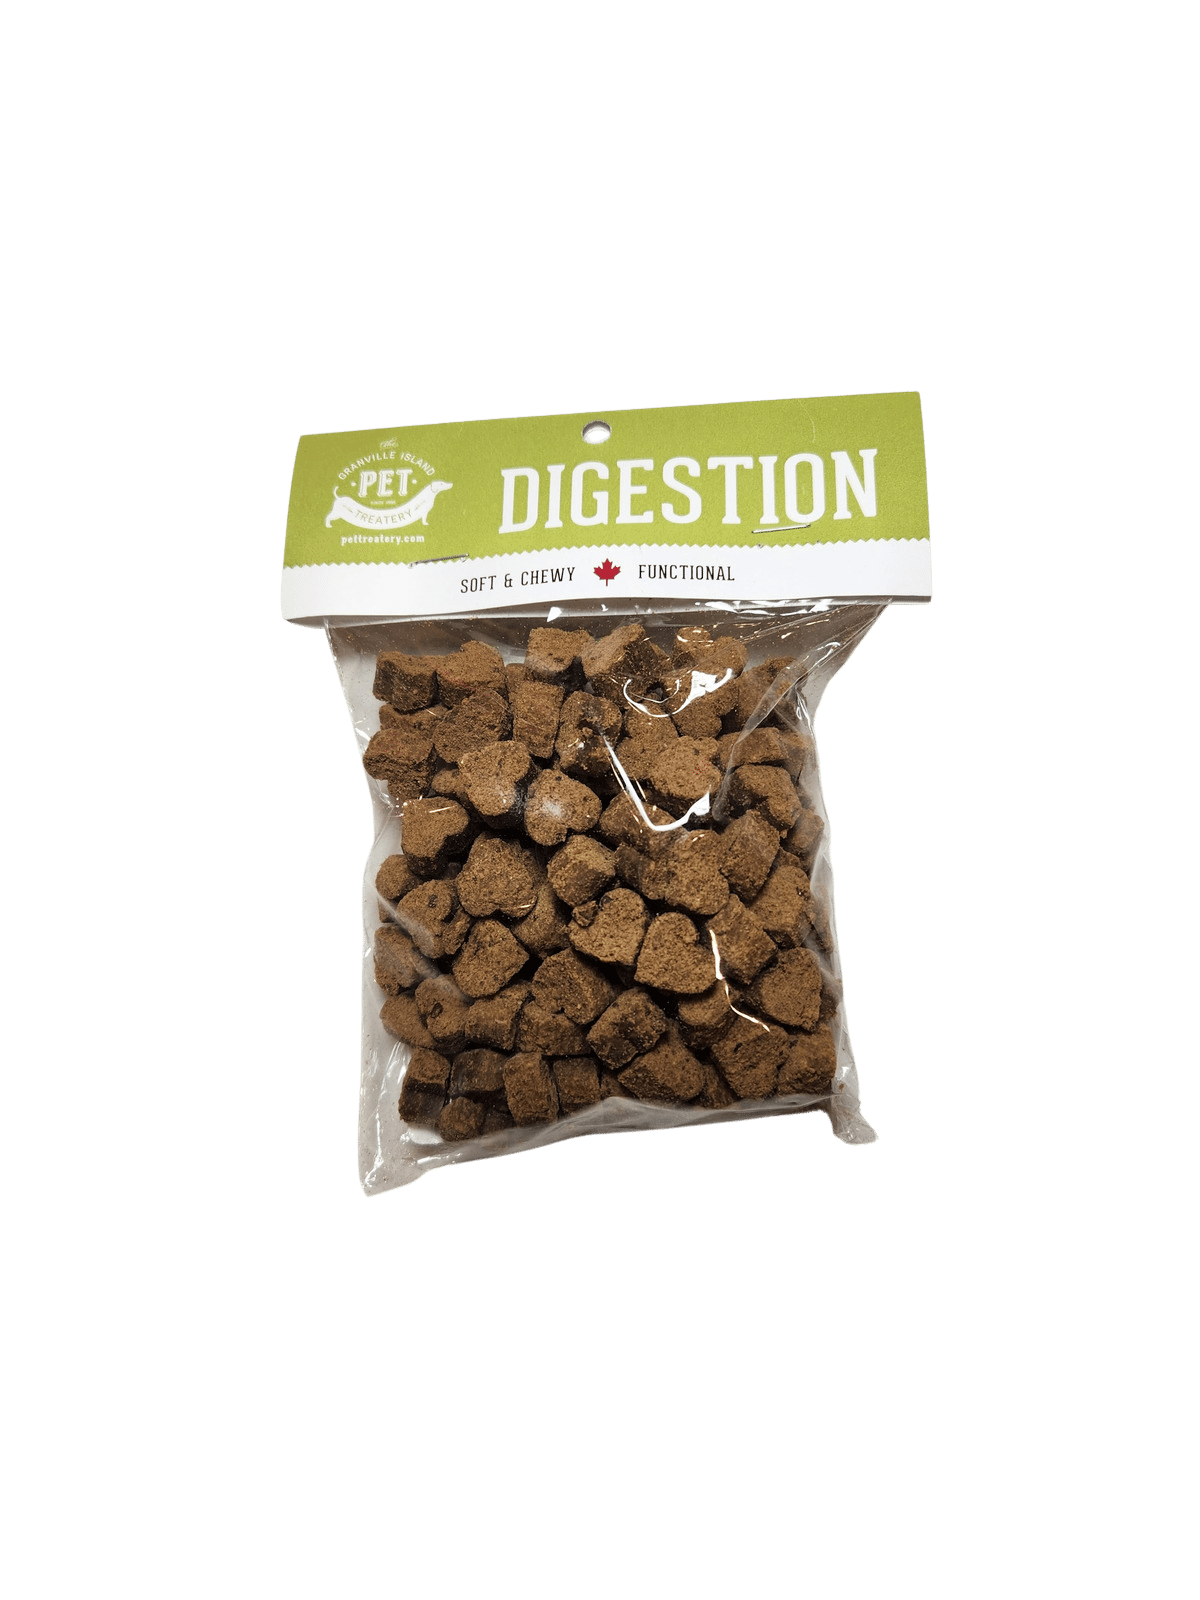 The Granville Island Pet Treatery - Digestion - Soft & Chewy